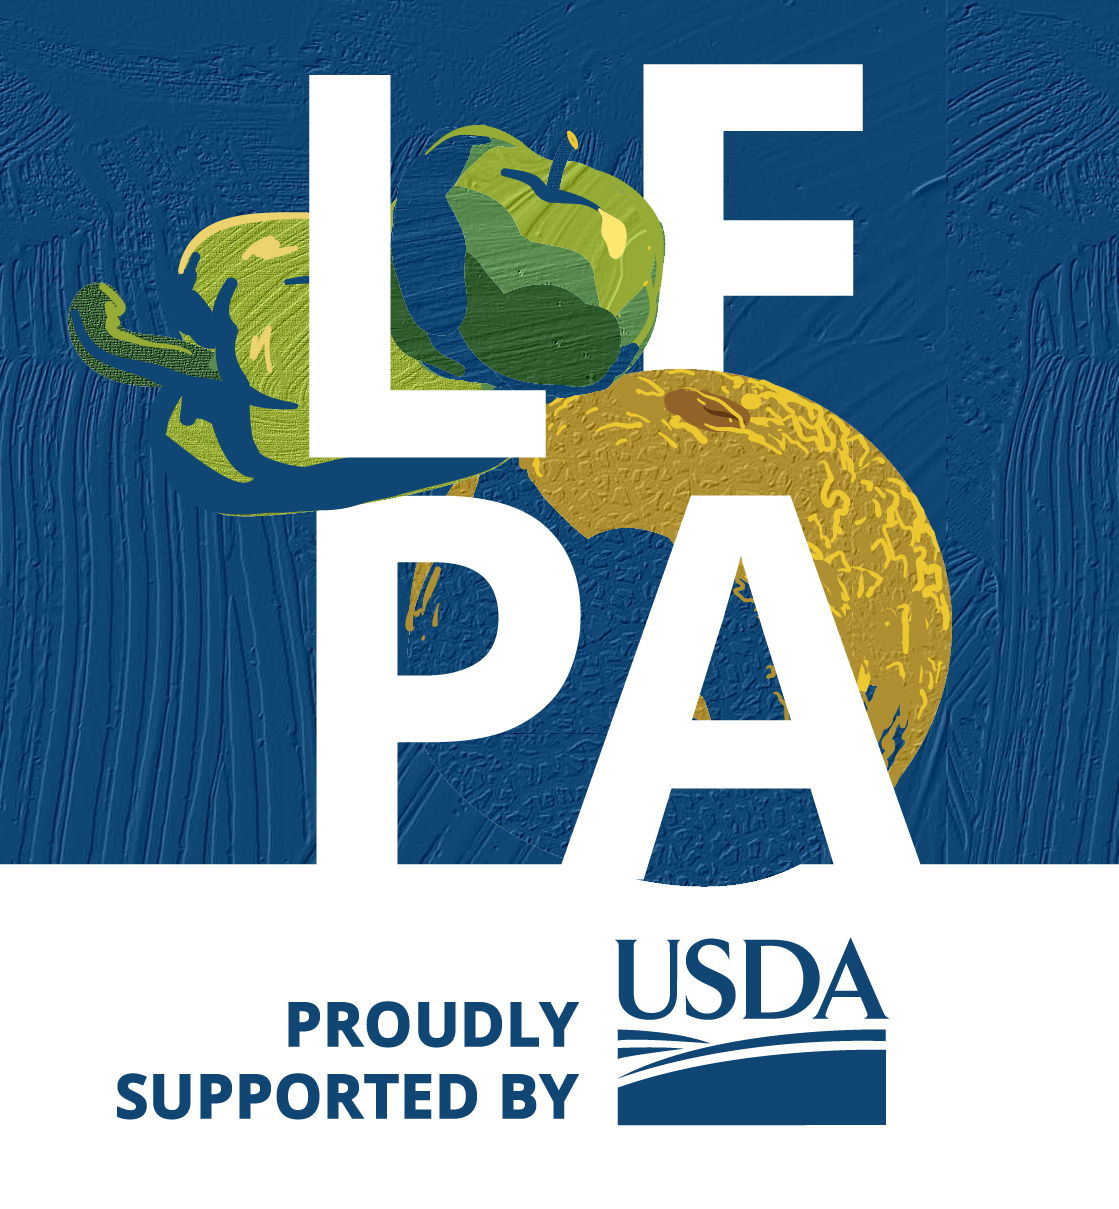 Image you can add to your texts to promote the LFPA Program